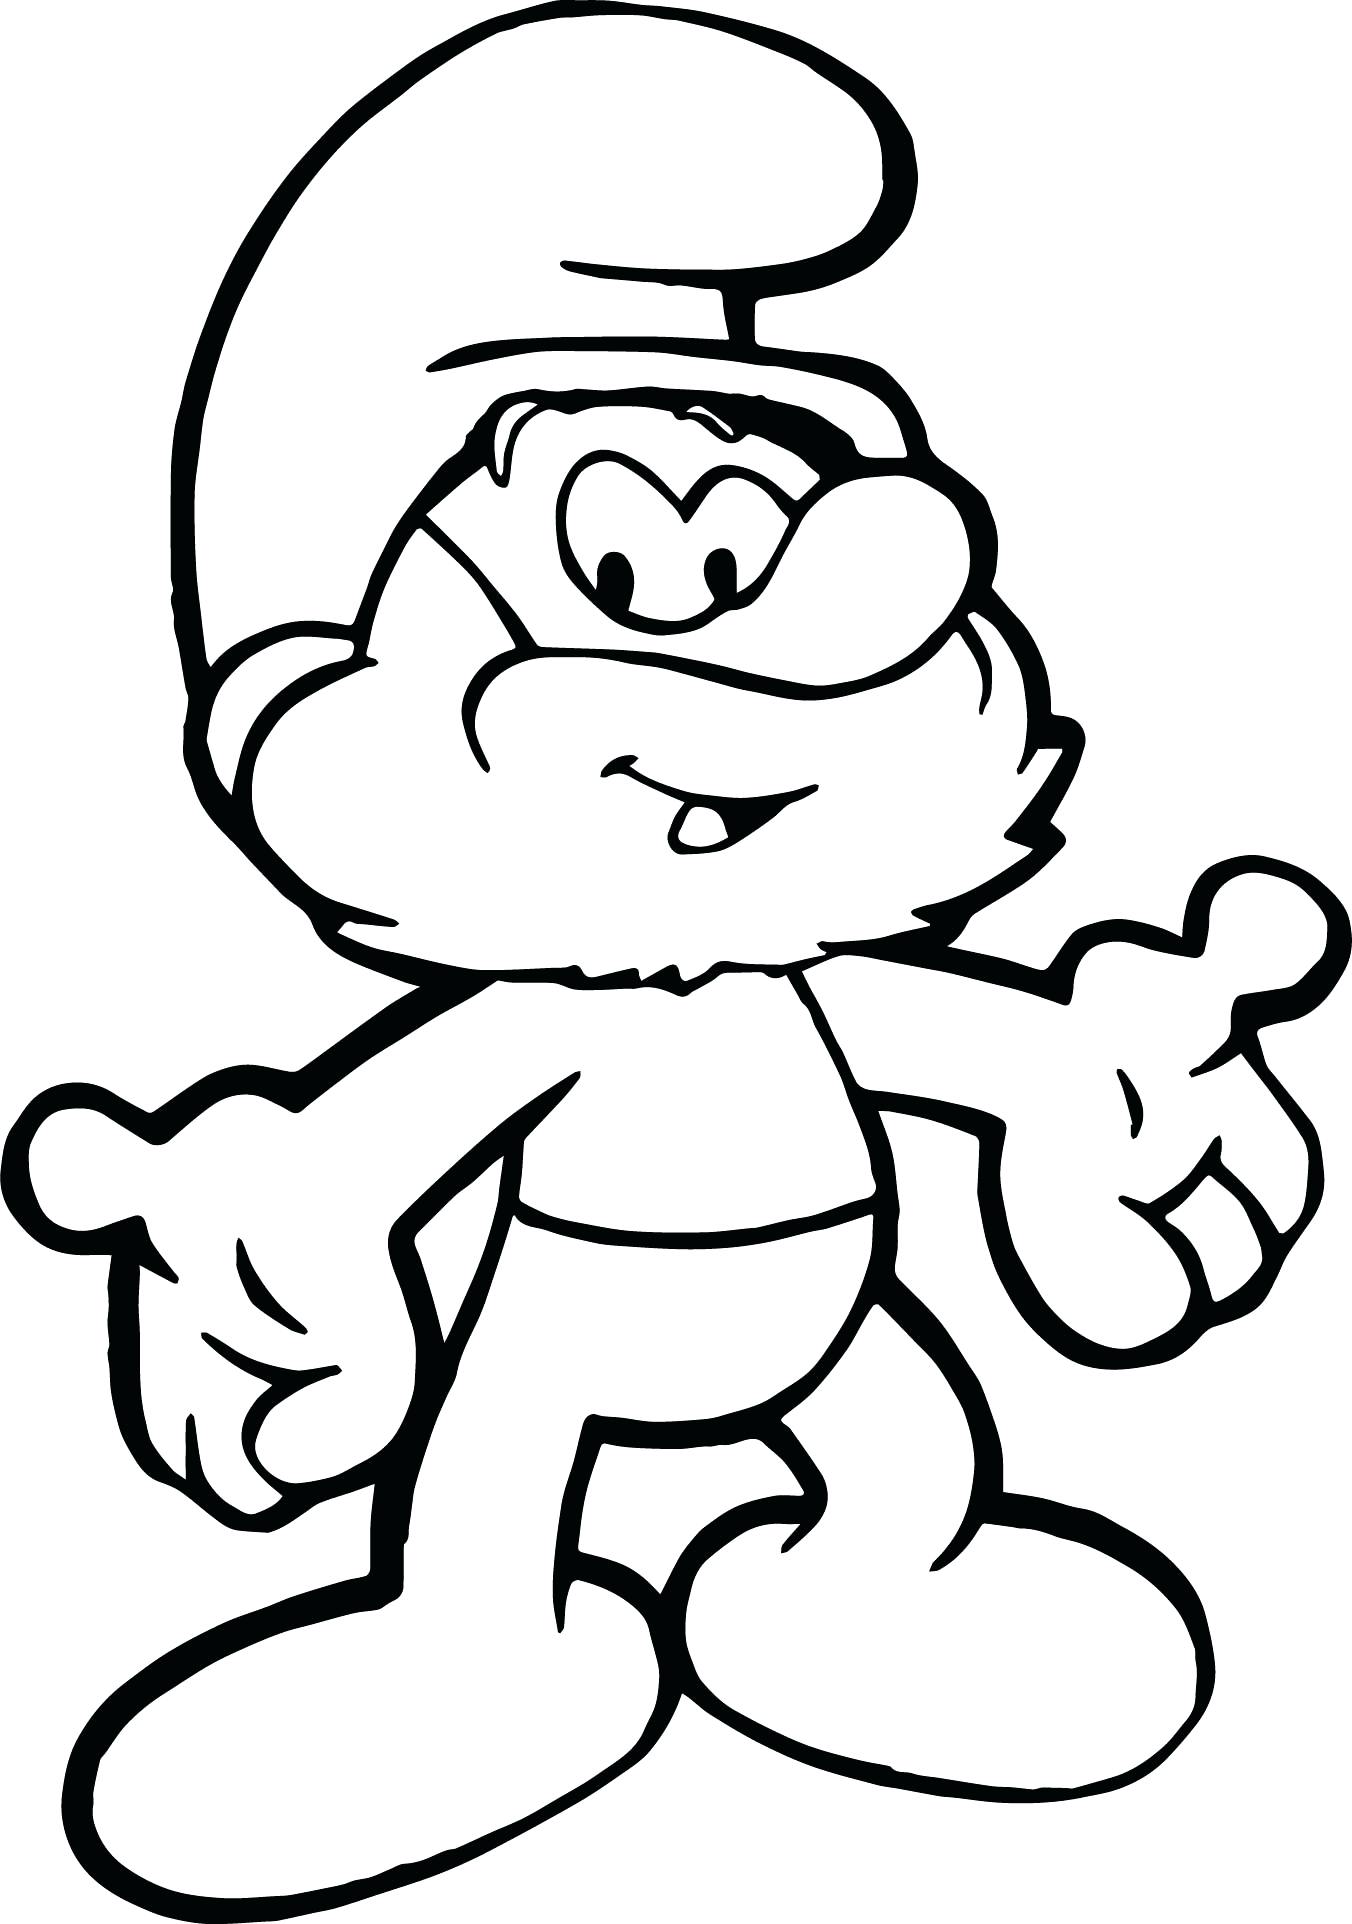 Printable Smurf Coloring Pages For Kids Coloring Pages